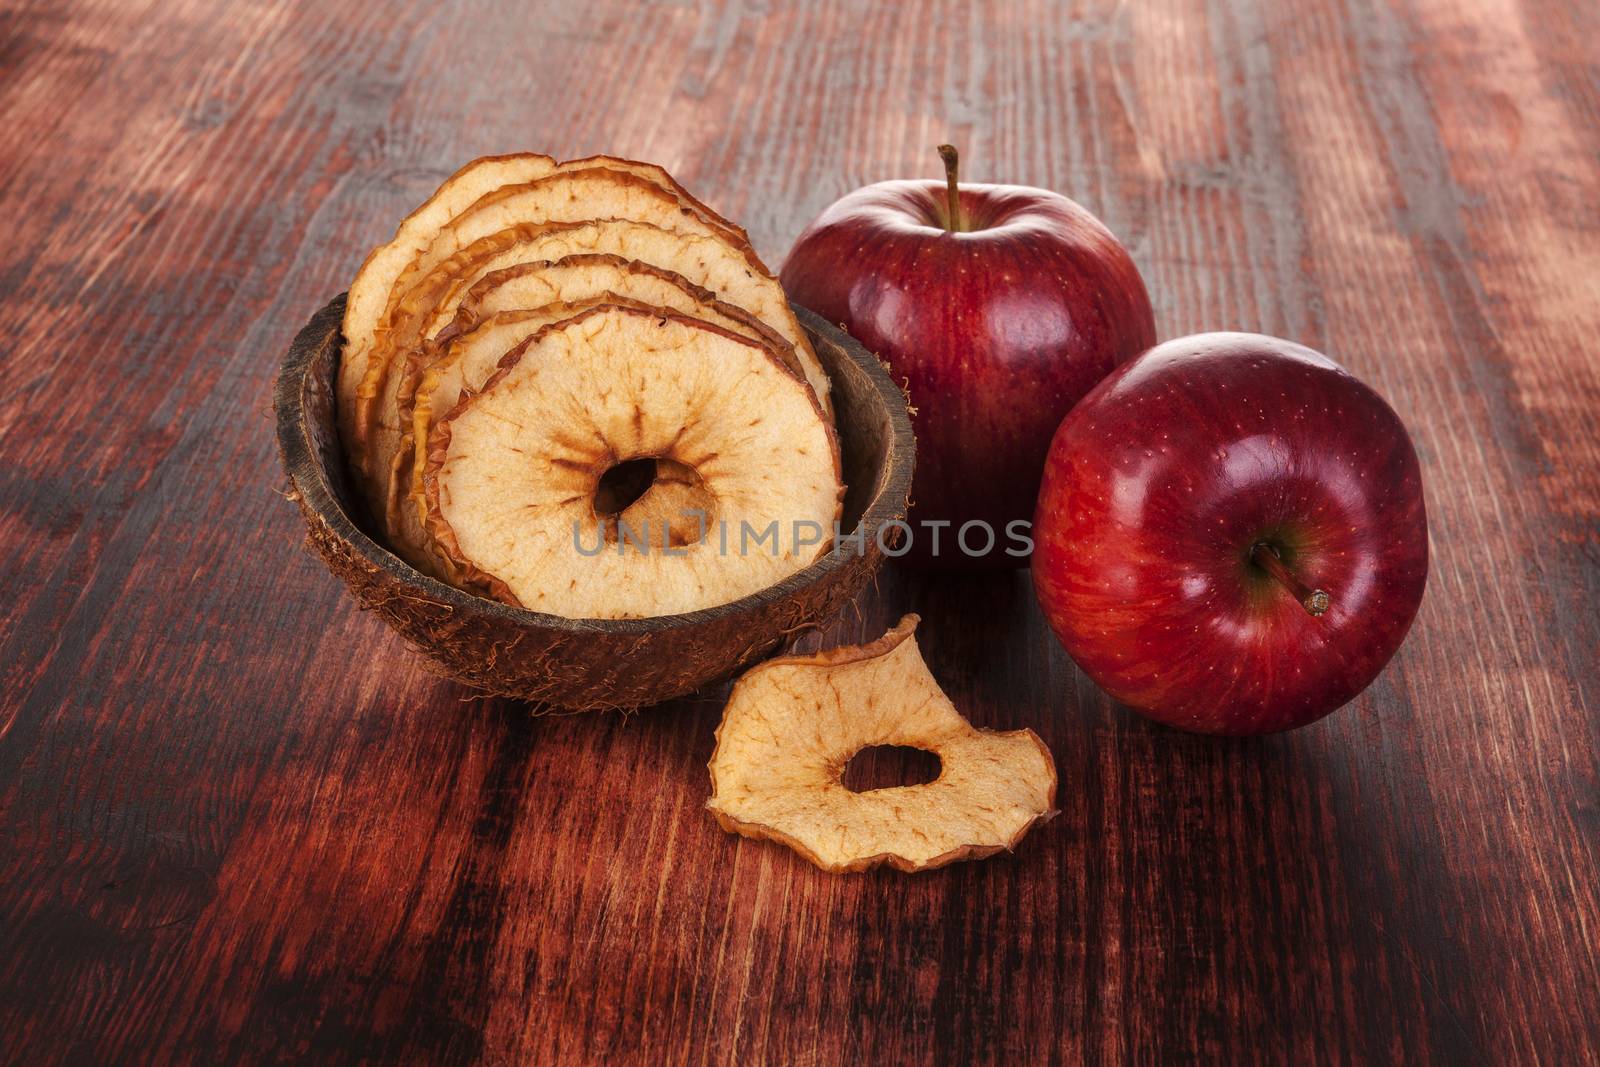 Dry and fresh apples on brown wooden table. Seasonal healthy snack eating.